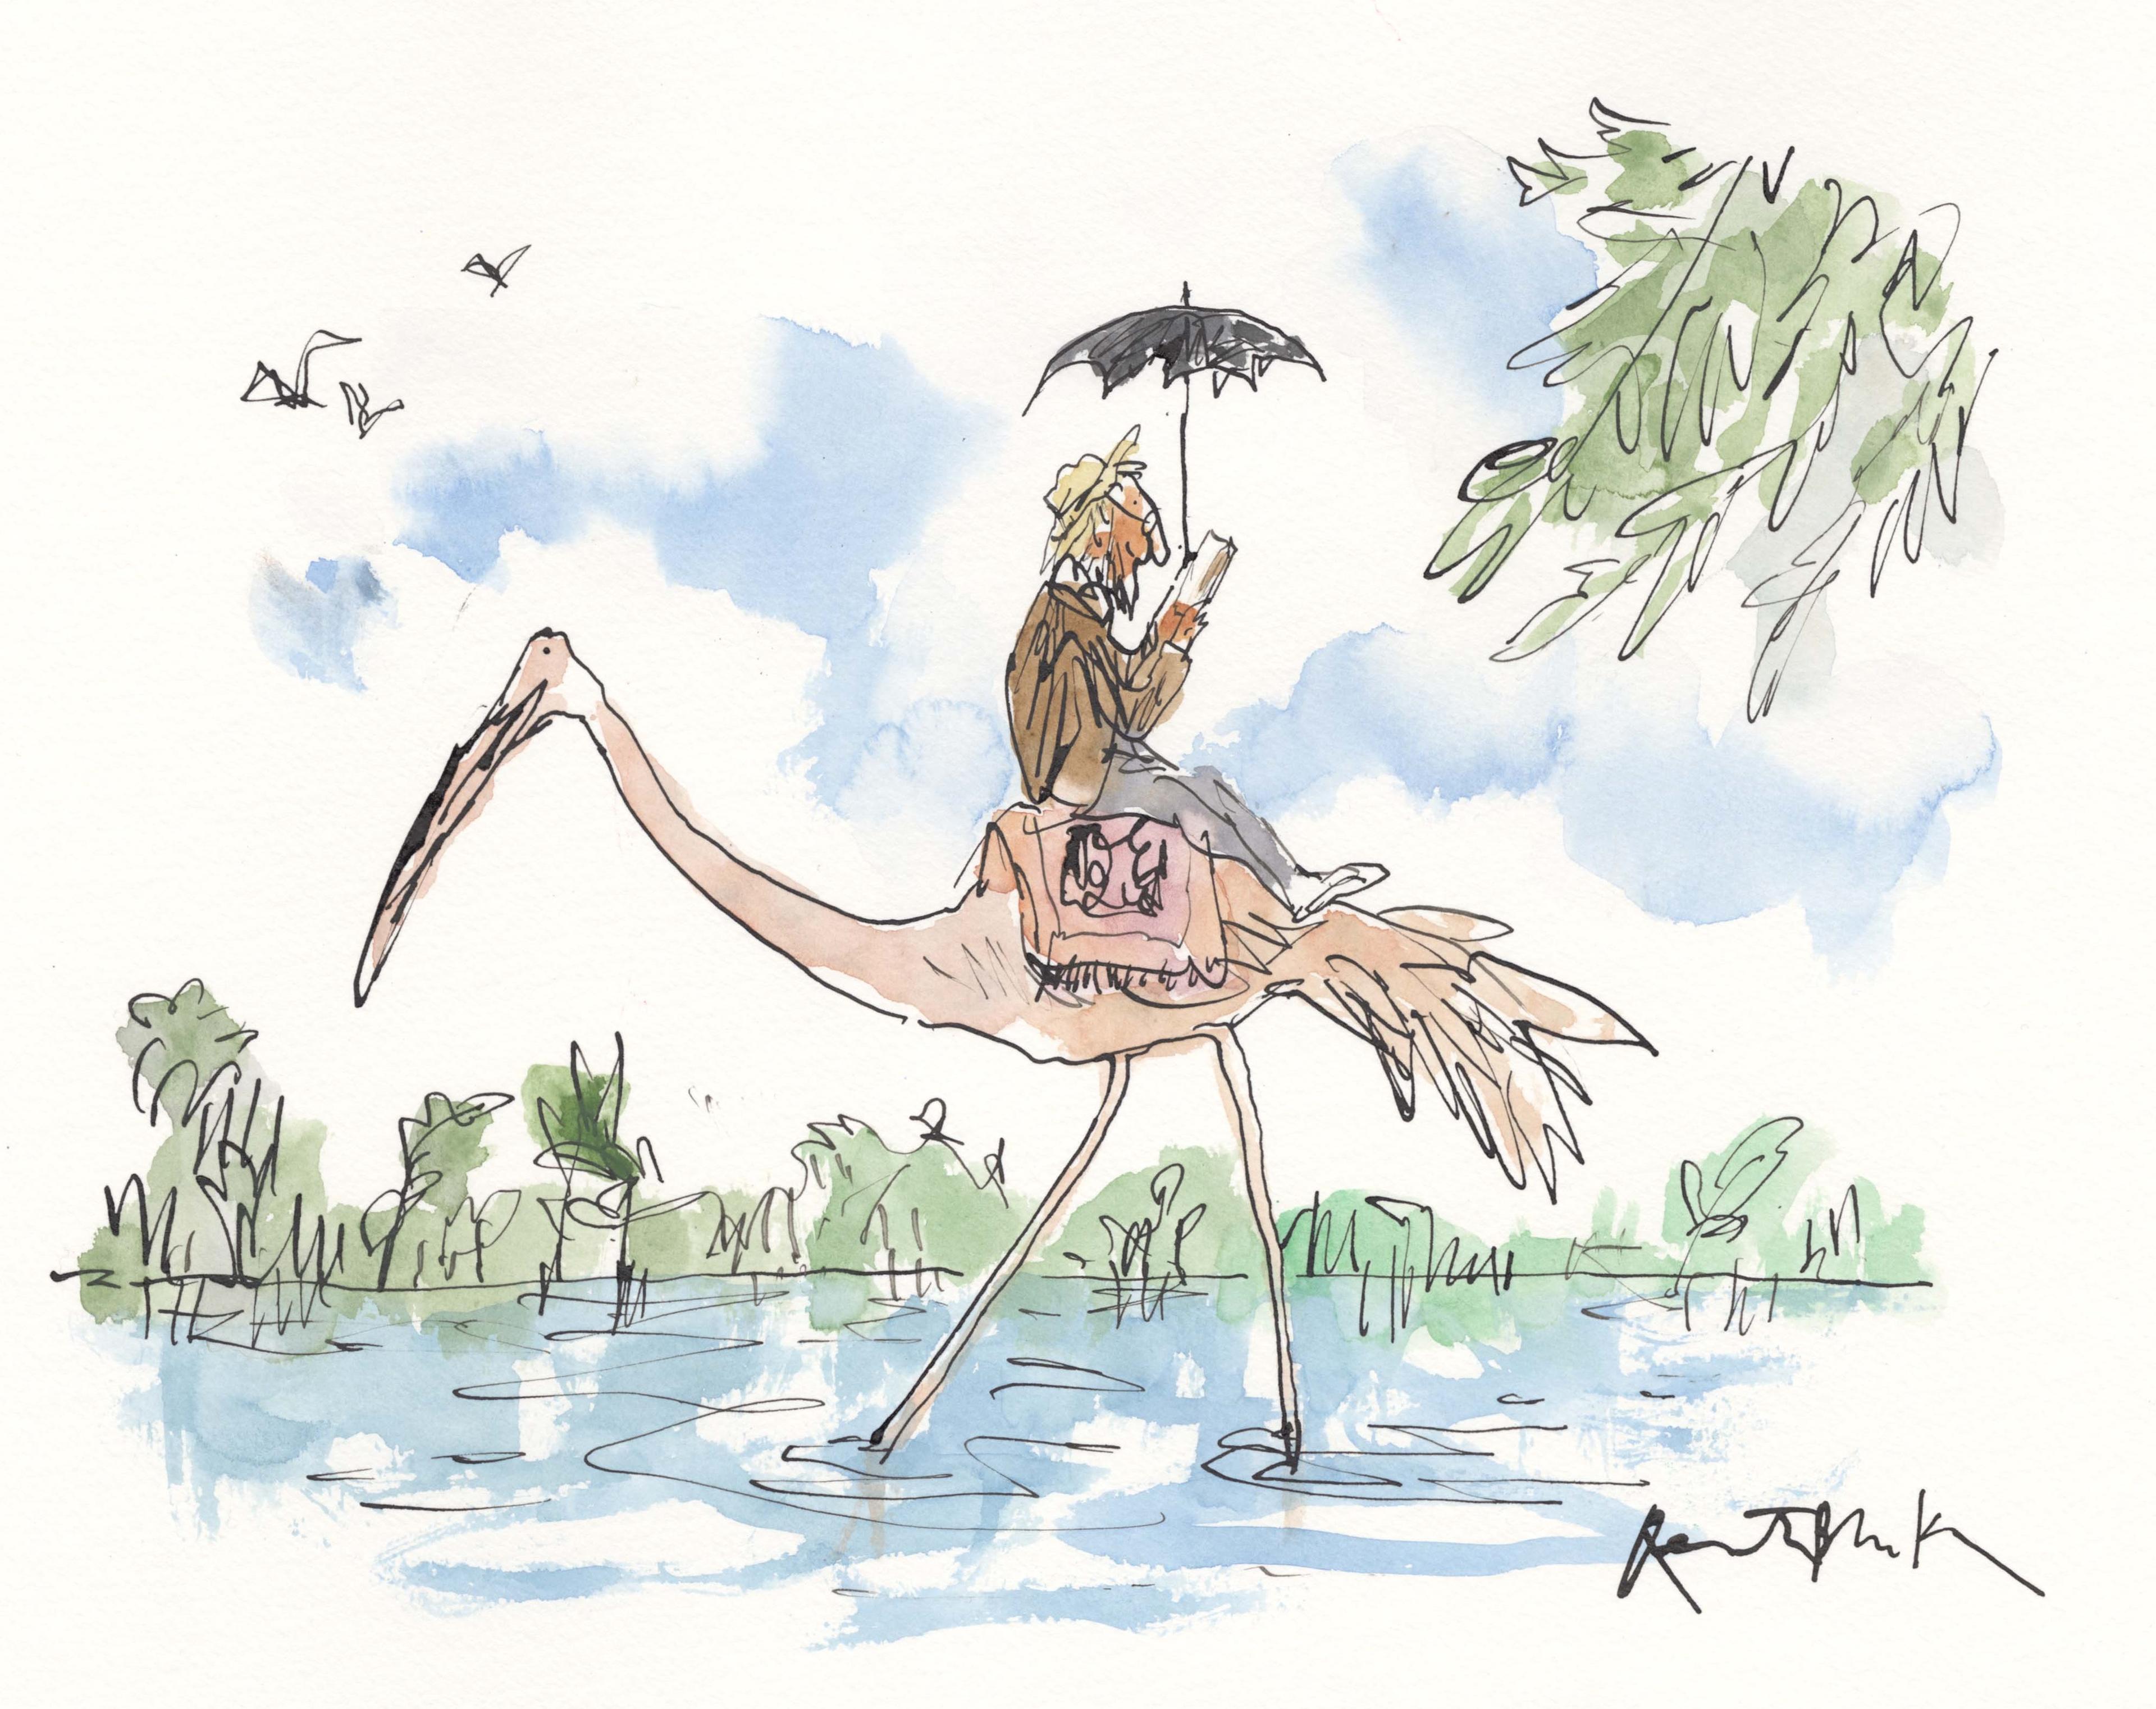 Illustration of a person riding on the back of a wading bird reading